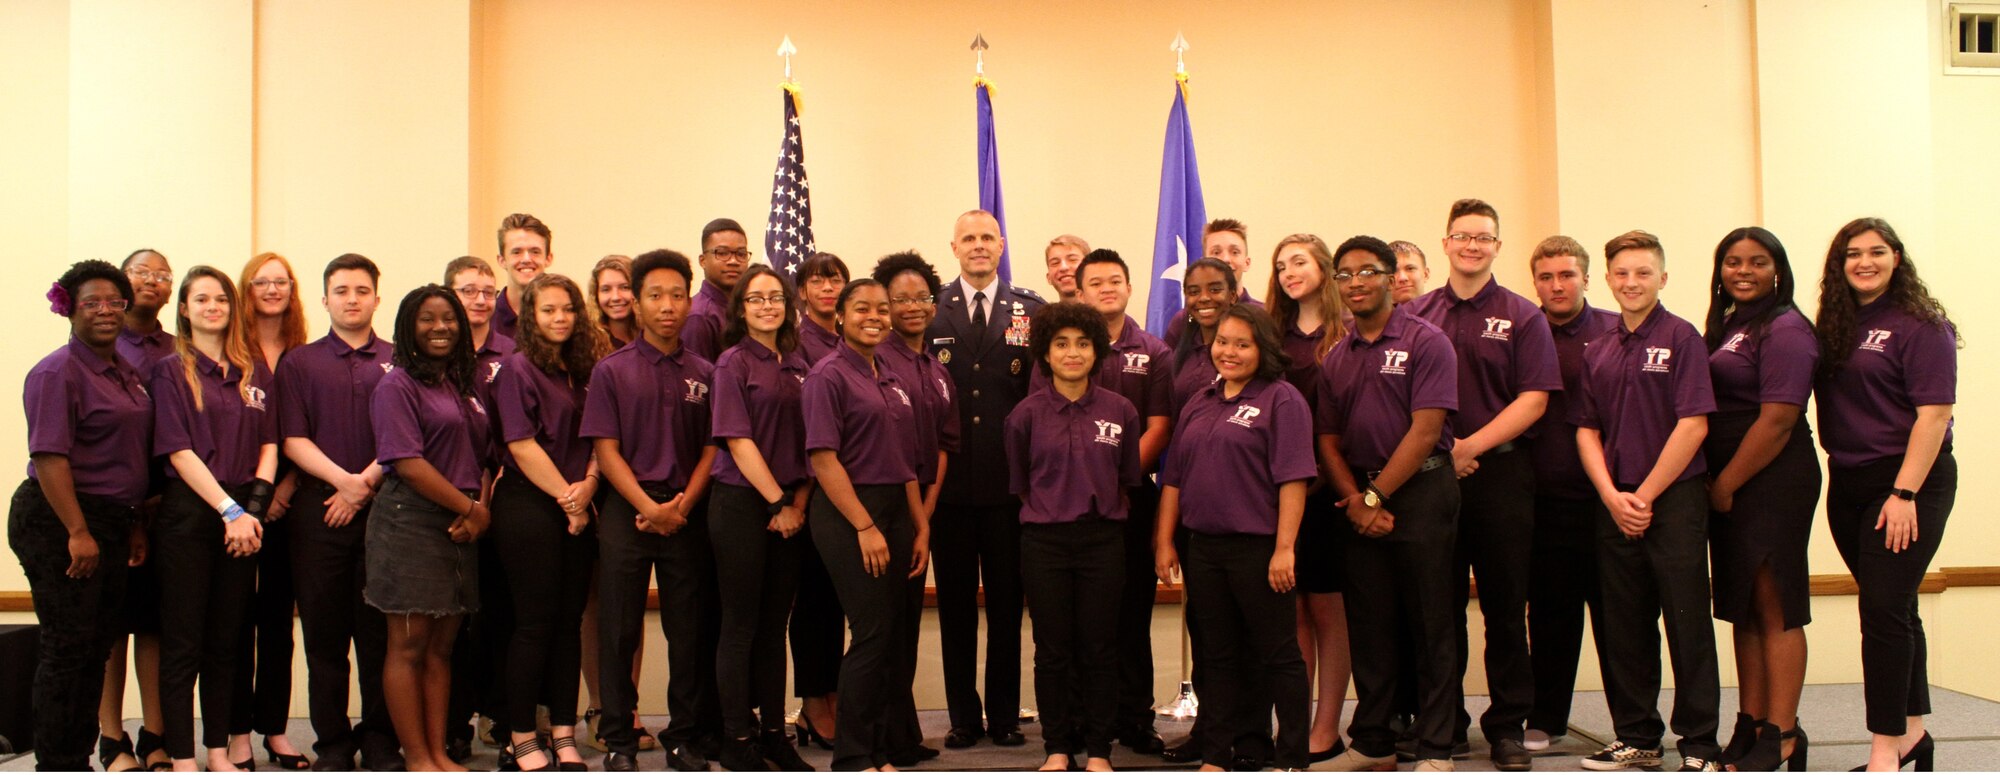 Maj. Gen. Brad Spacy (center), Air Force Installation and Mission Support Center commander, poses for a photo with installation and, in some cases, state military youth of the year winners during an awards ceremony at the conclusion of the 2019 Military Youth of the Year Summit in San Antonio June 17-21.